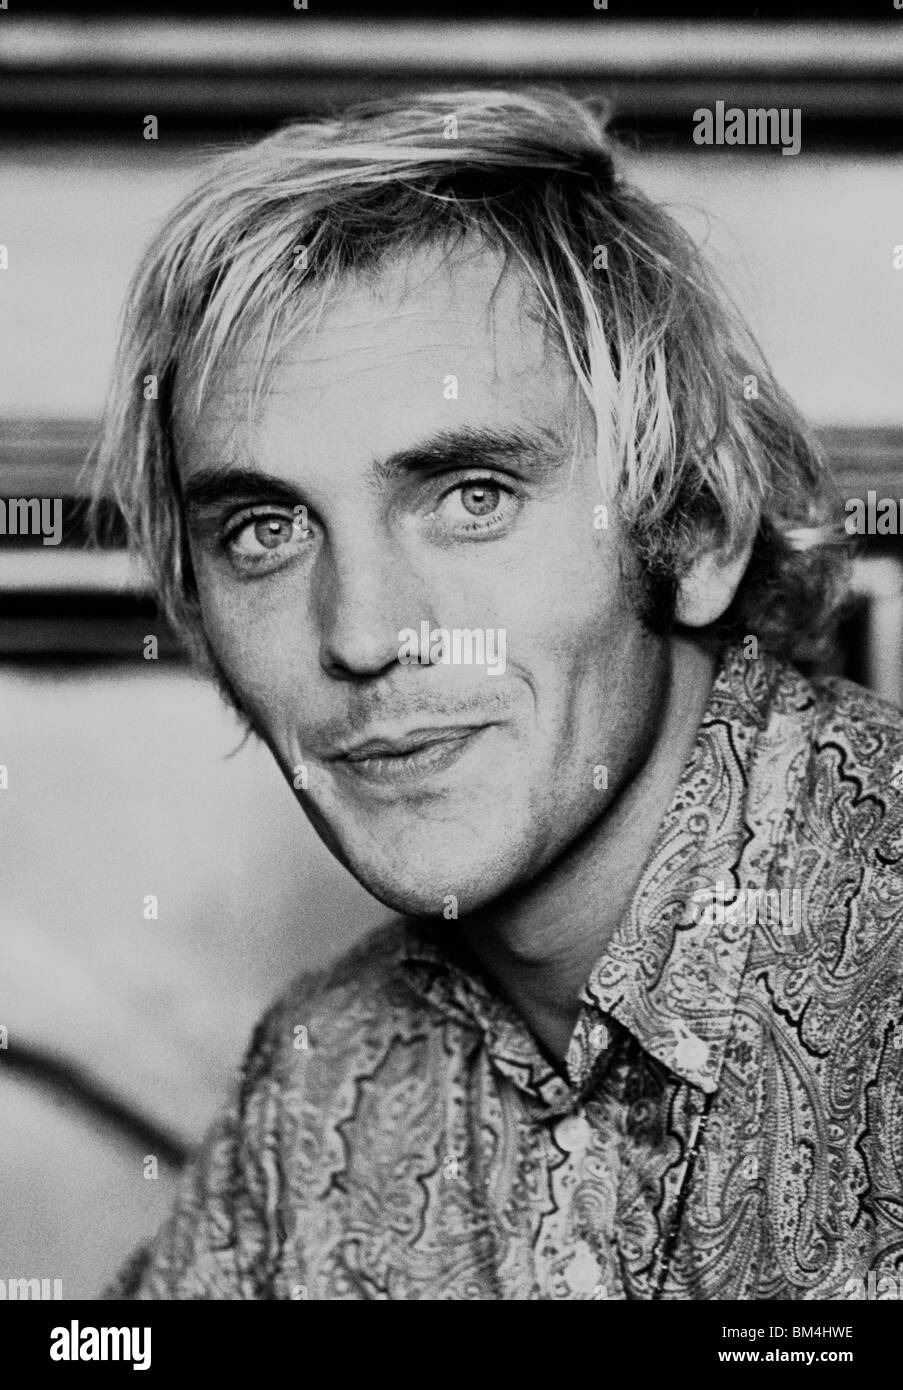 British actor Terence Stamp photographed in 1967 doing publicity interviews on location in Somerset for the John Schlesinger directed MGM film Far From the Madding Crowd in which he appears with Julie Christie and David Hemmings. He was at the start of his very long career in film. Stock Photo